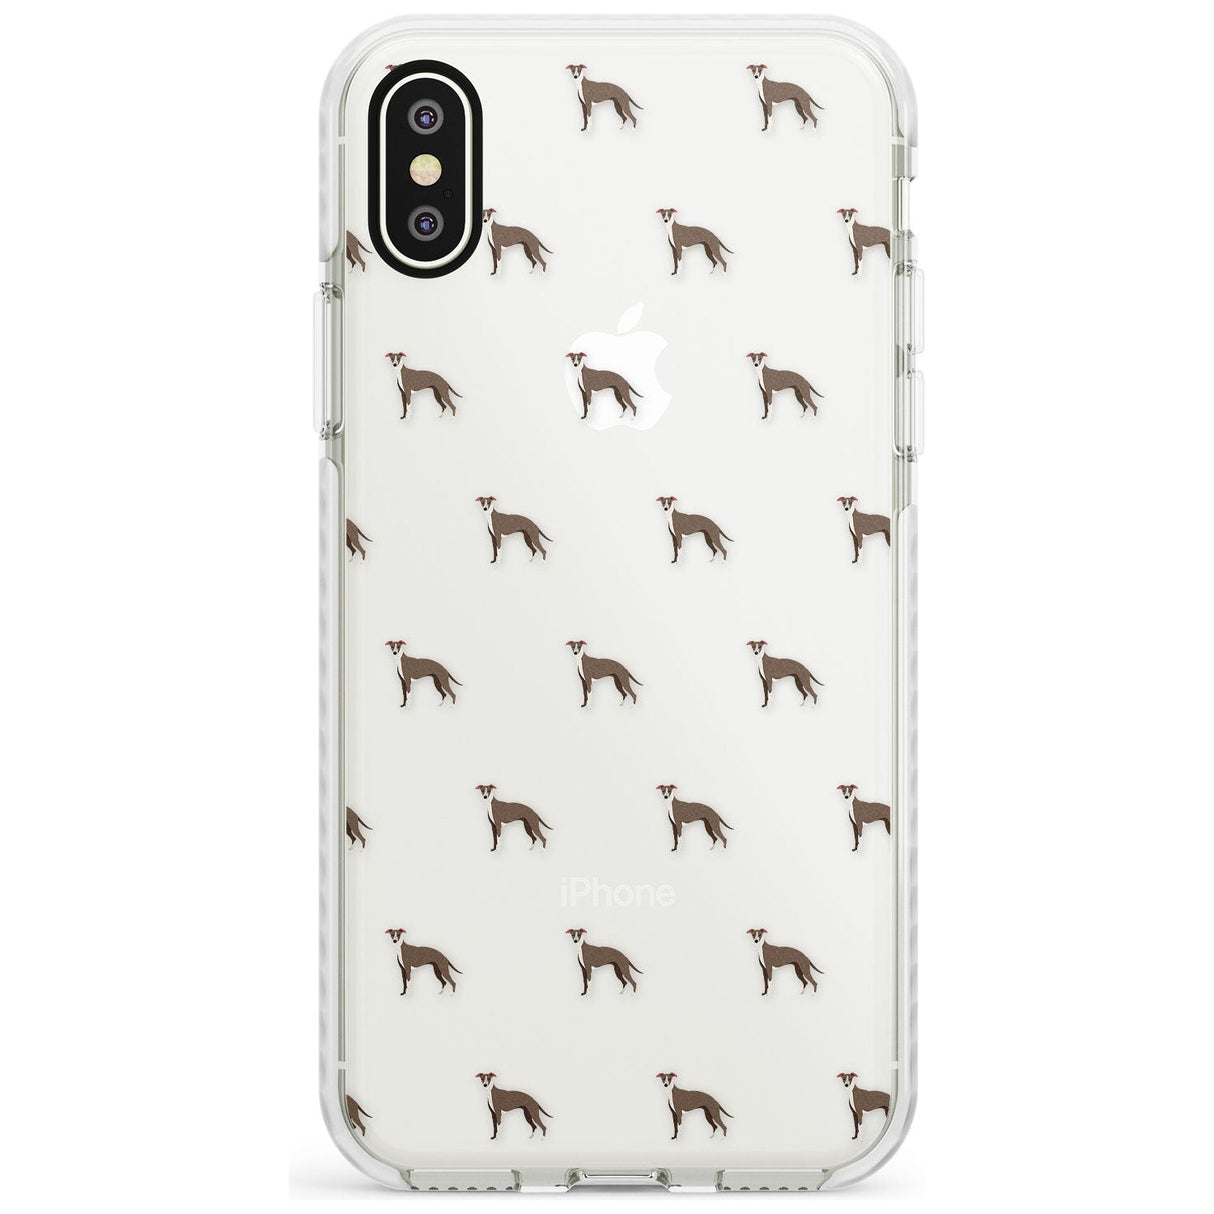 Whippet/Italian Greyhound Dog Pattern Clear Impact Phone Case for iPhone X XS Max XR